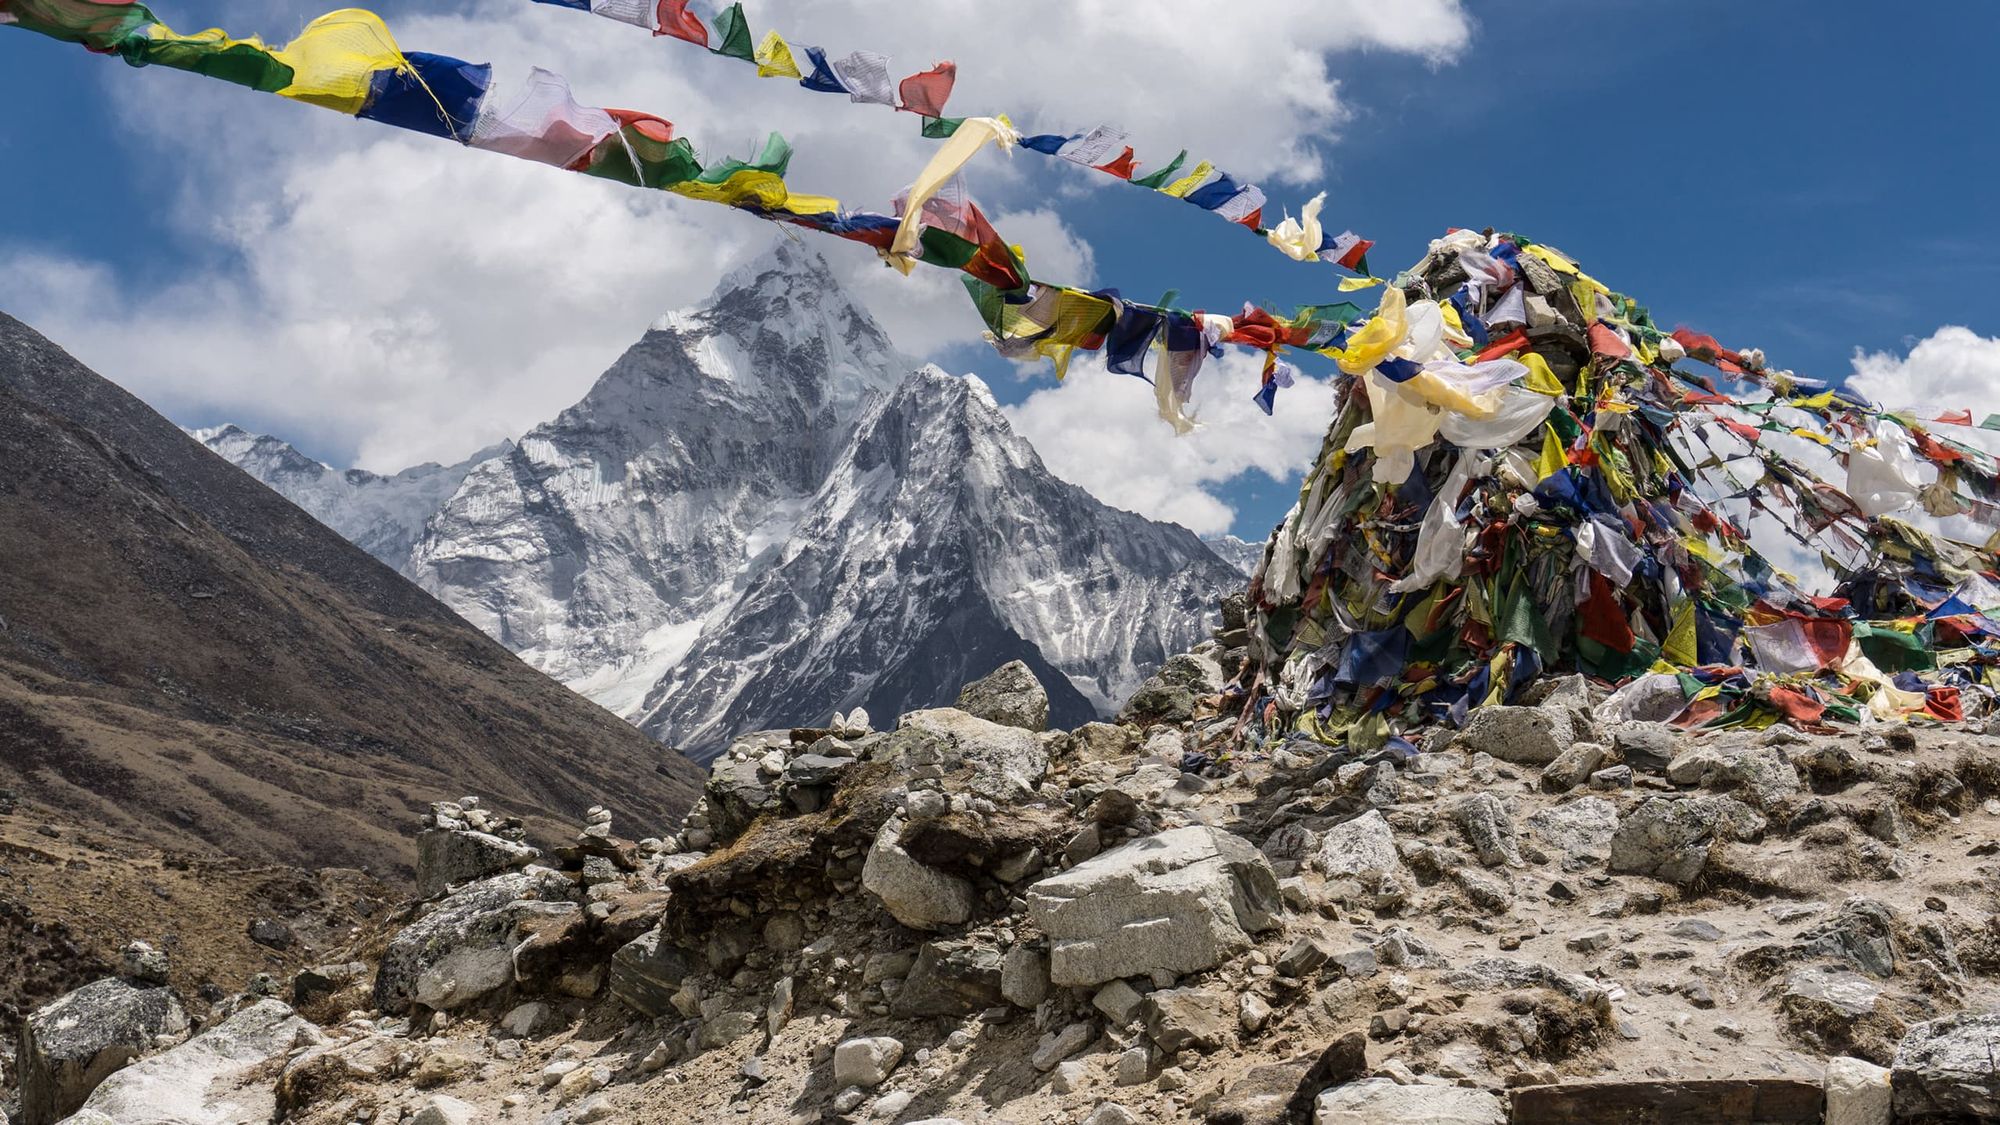 Hiking from Dingboche to Lobuche on the Everest Base Camp trek through Nepal's Himalayas. Photo: iStock